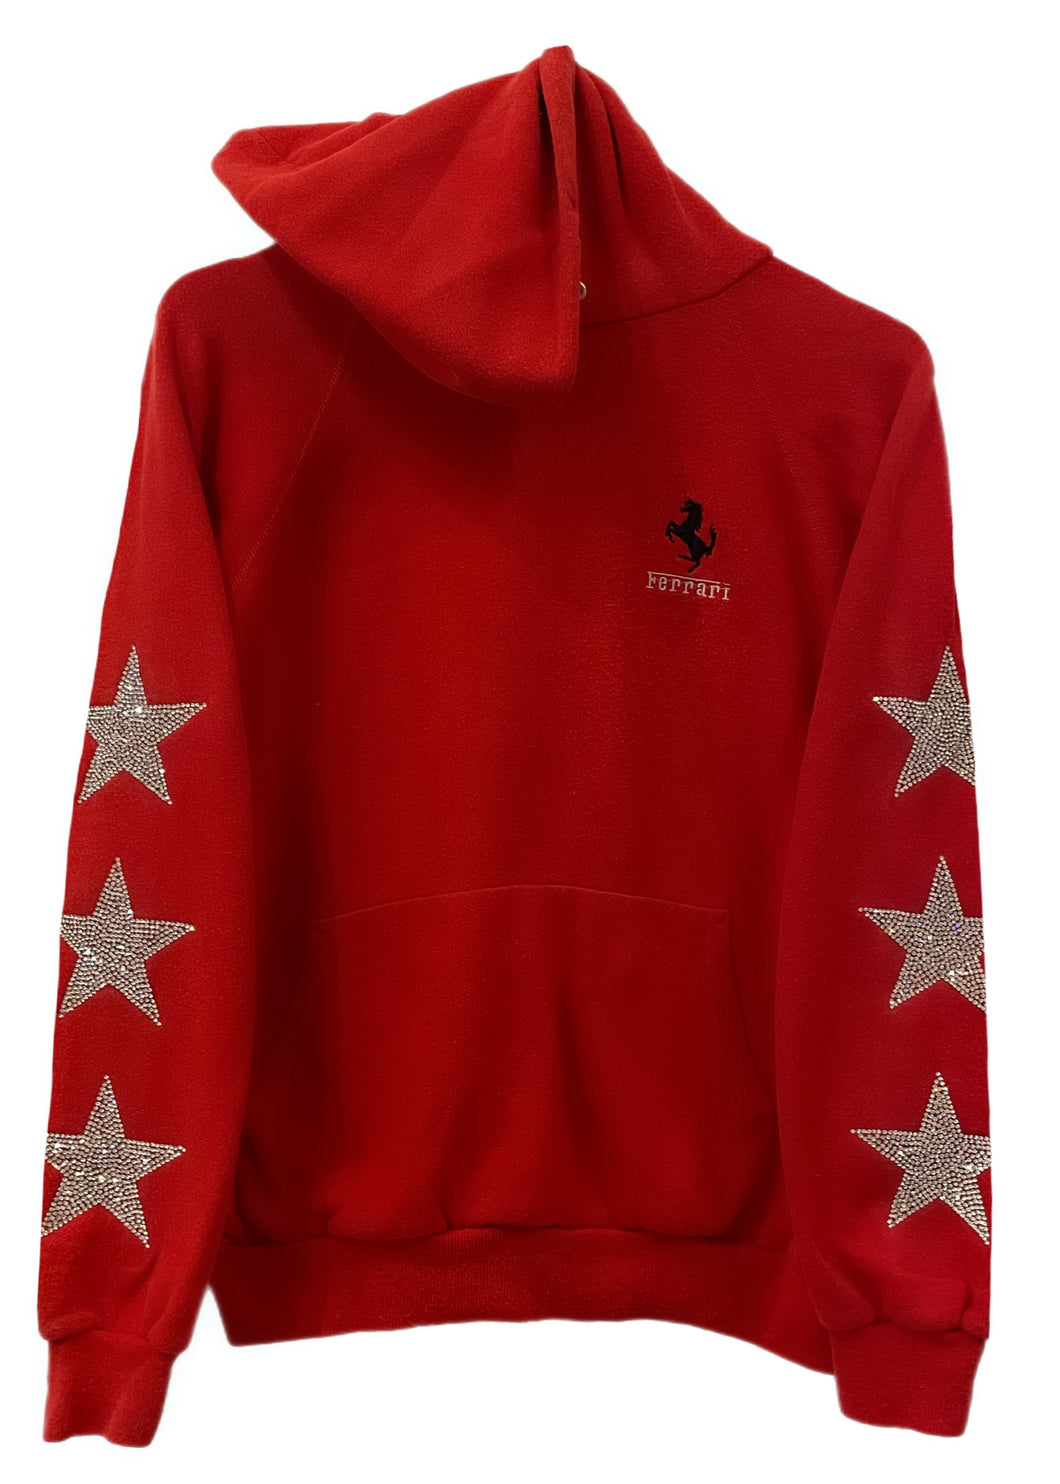 Ferrari Hoodie, One of a KIND “Rare Find” Vintage with Three Crystal Star Design